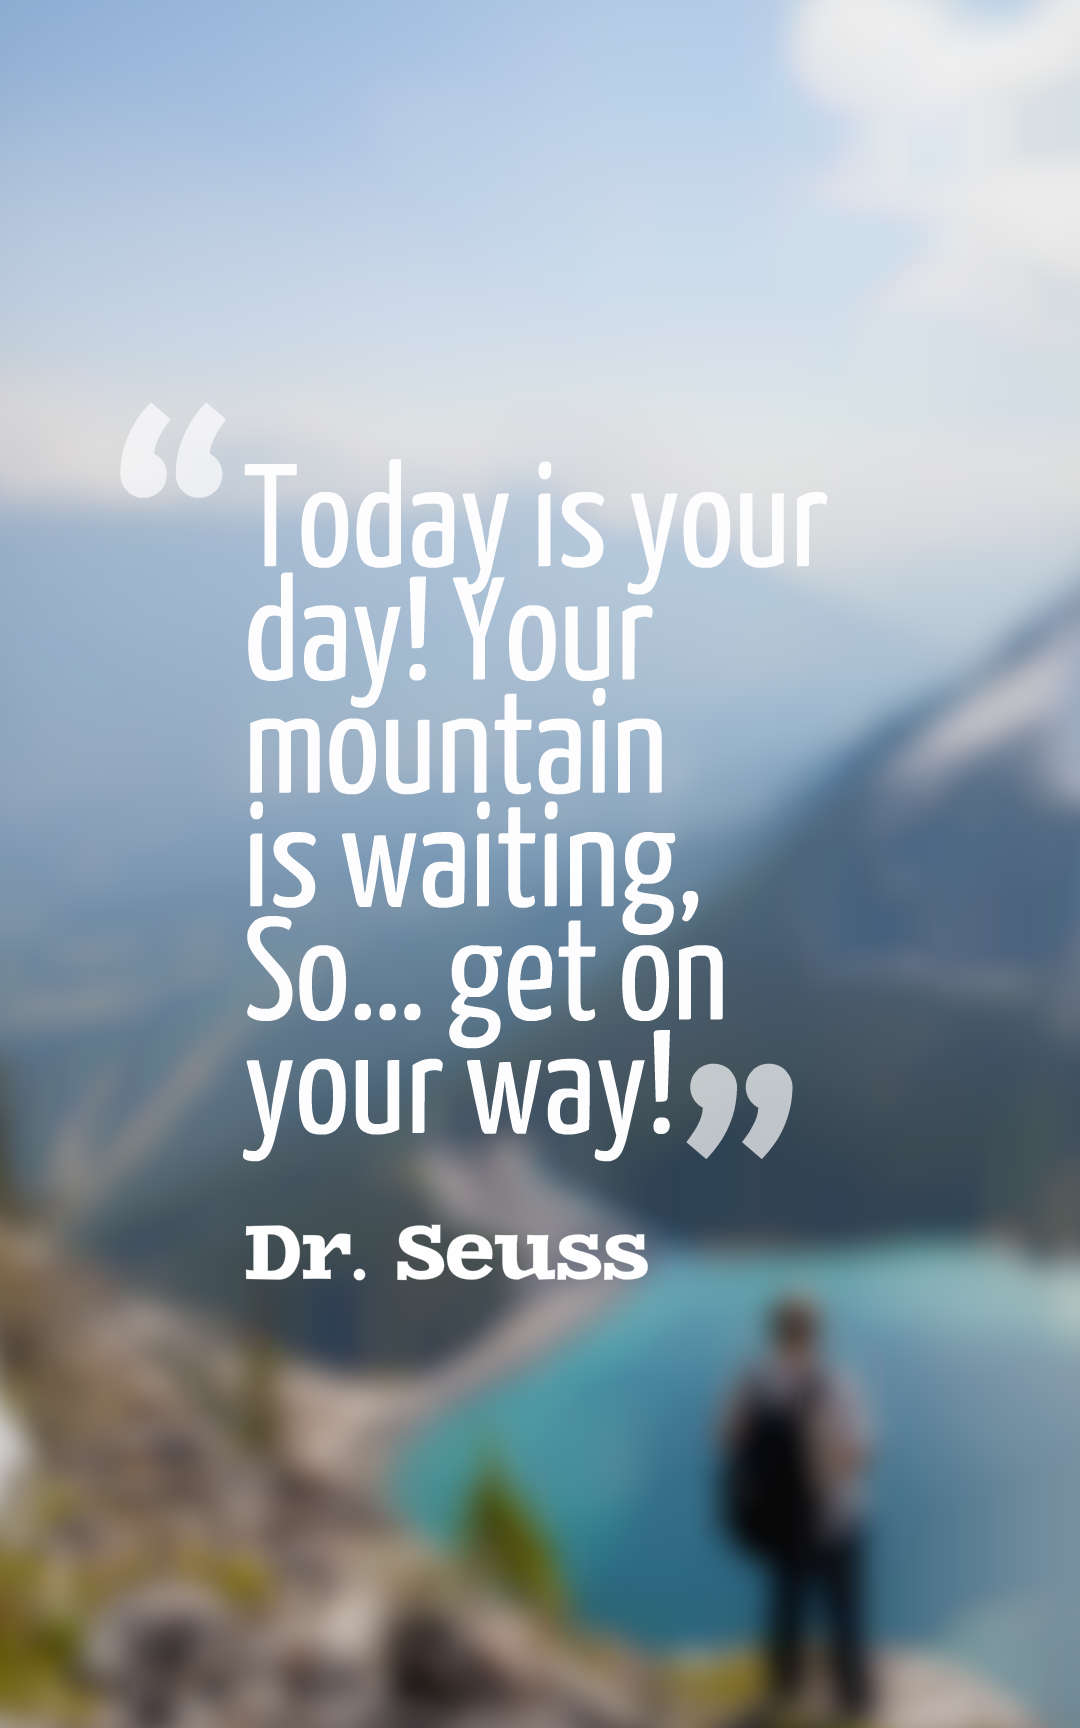 Today is your day! Your mountain is waiting, So… get on your way!